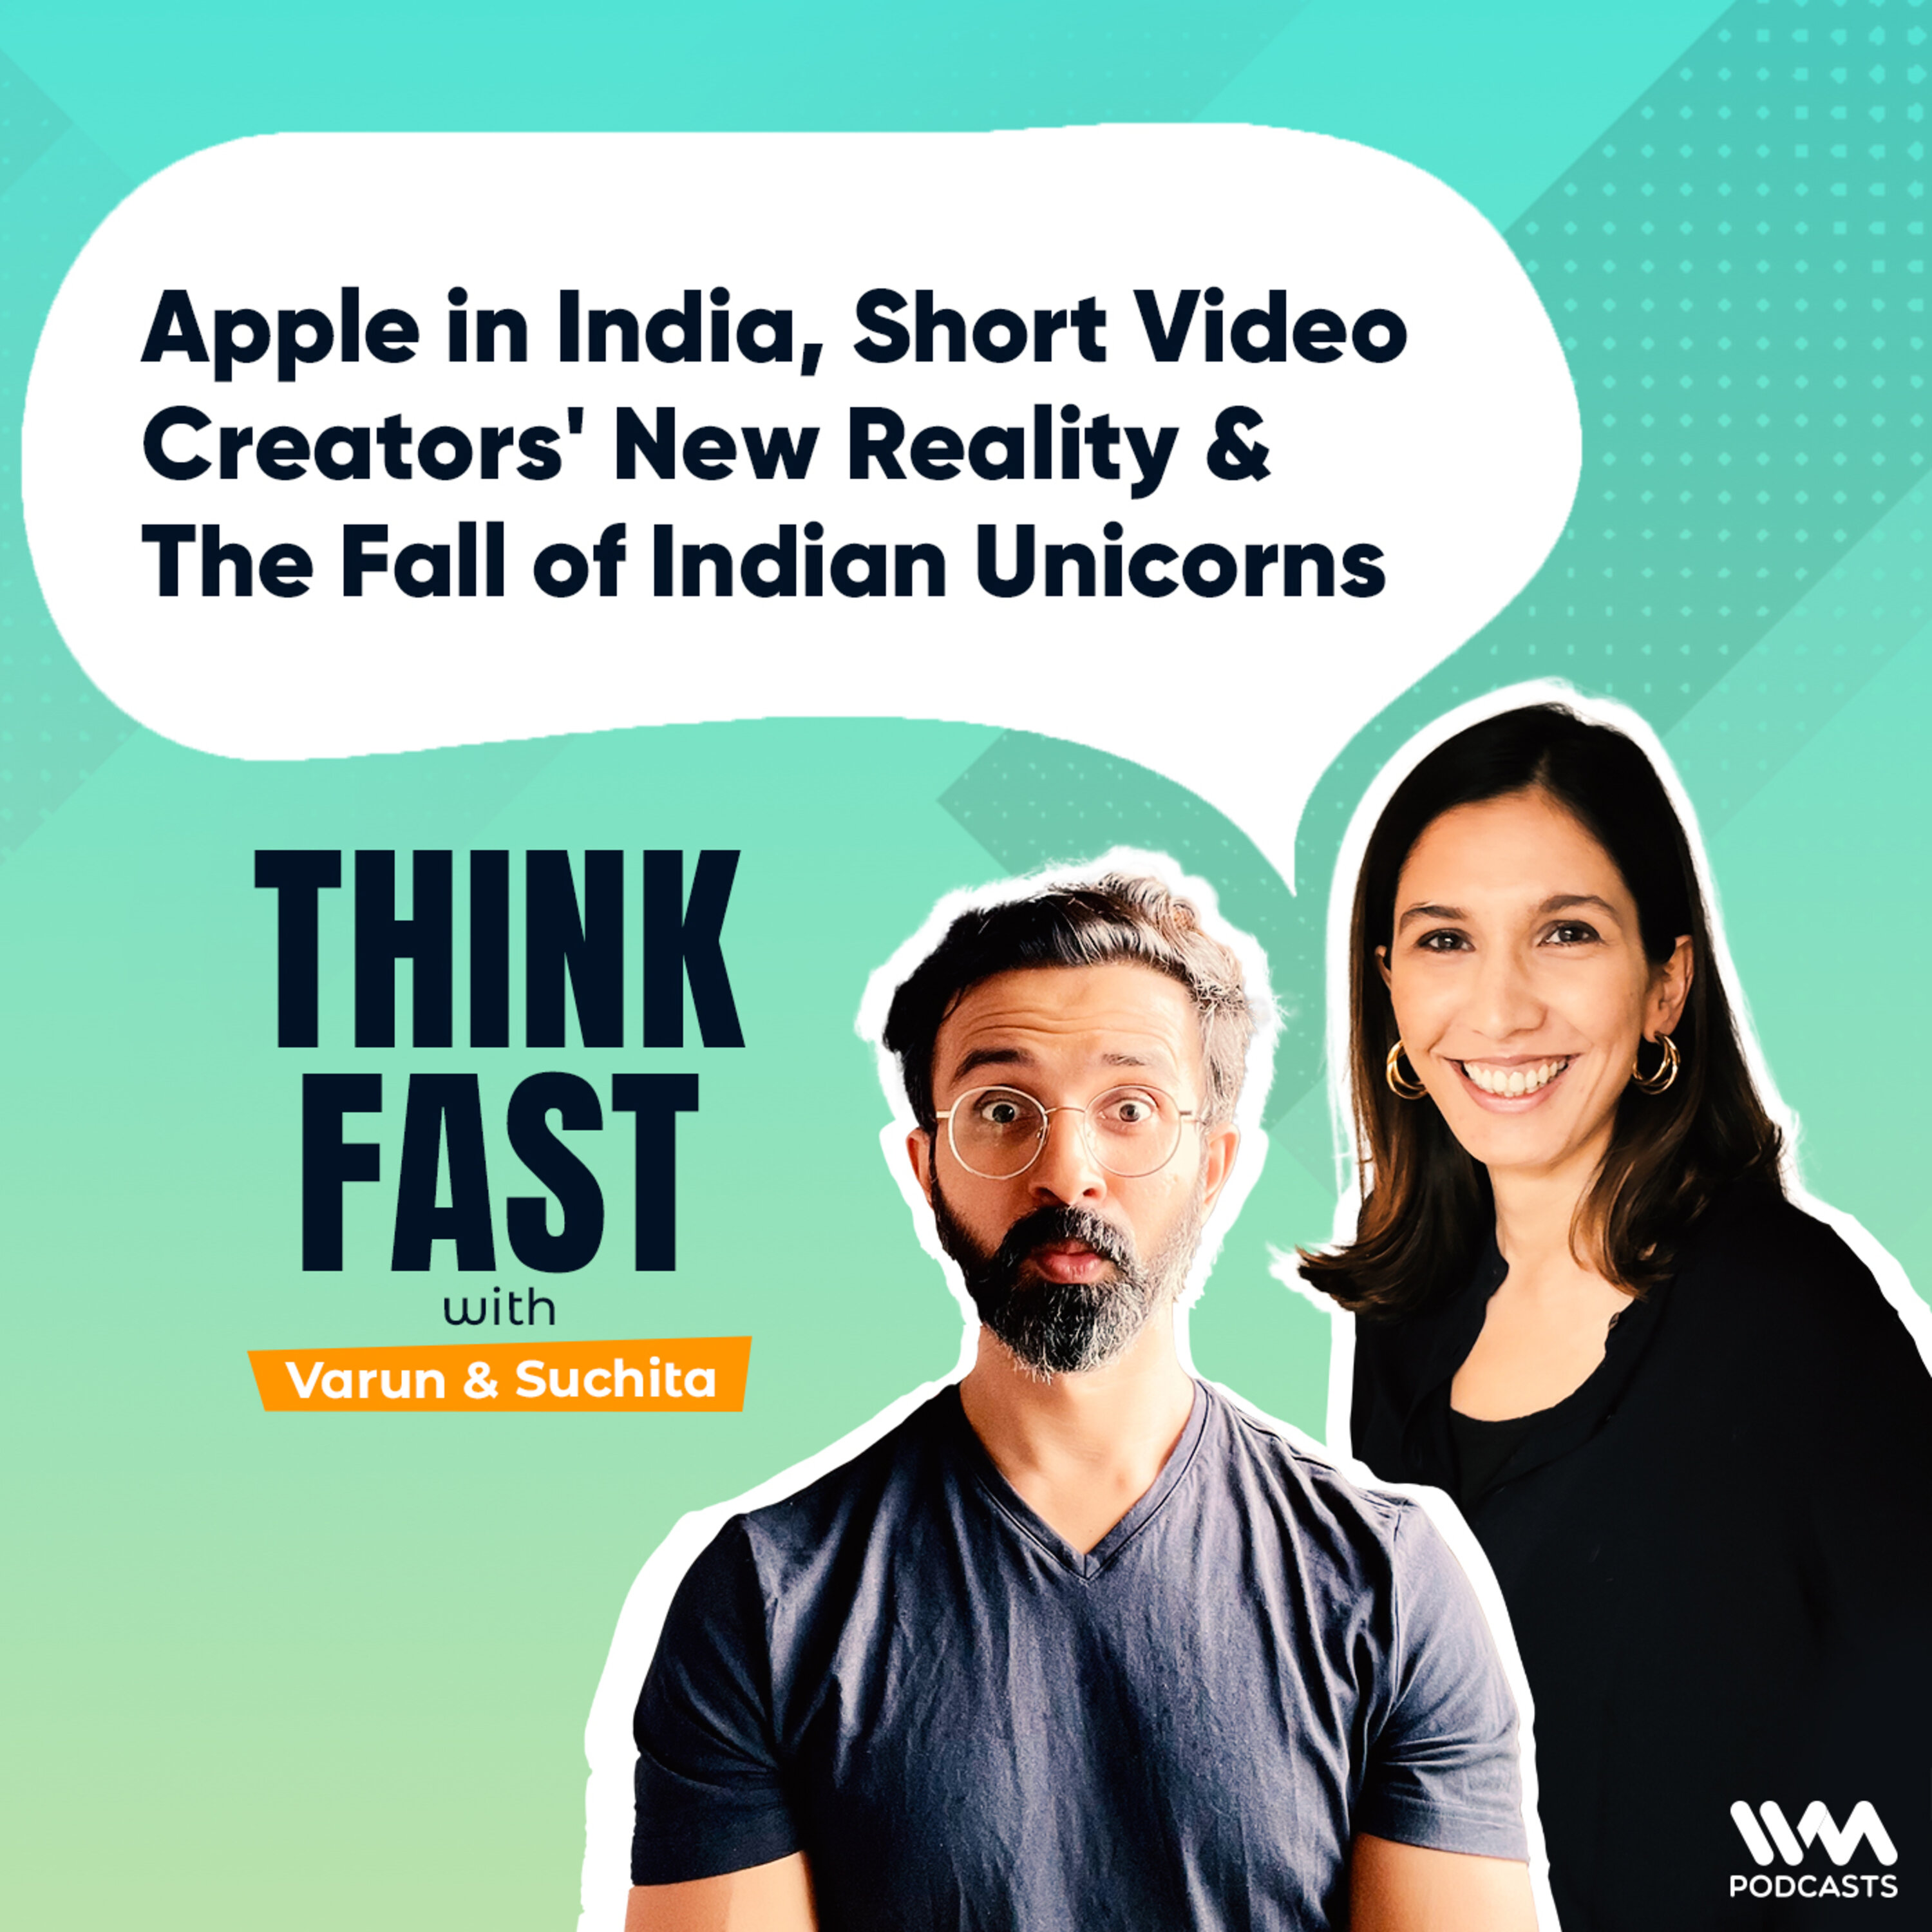 Apple in India, Short Video Creators' New Reality & The Fall of Indian Unicorns